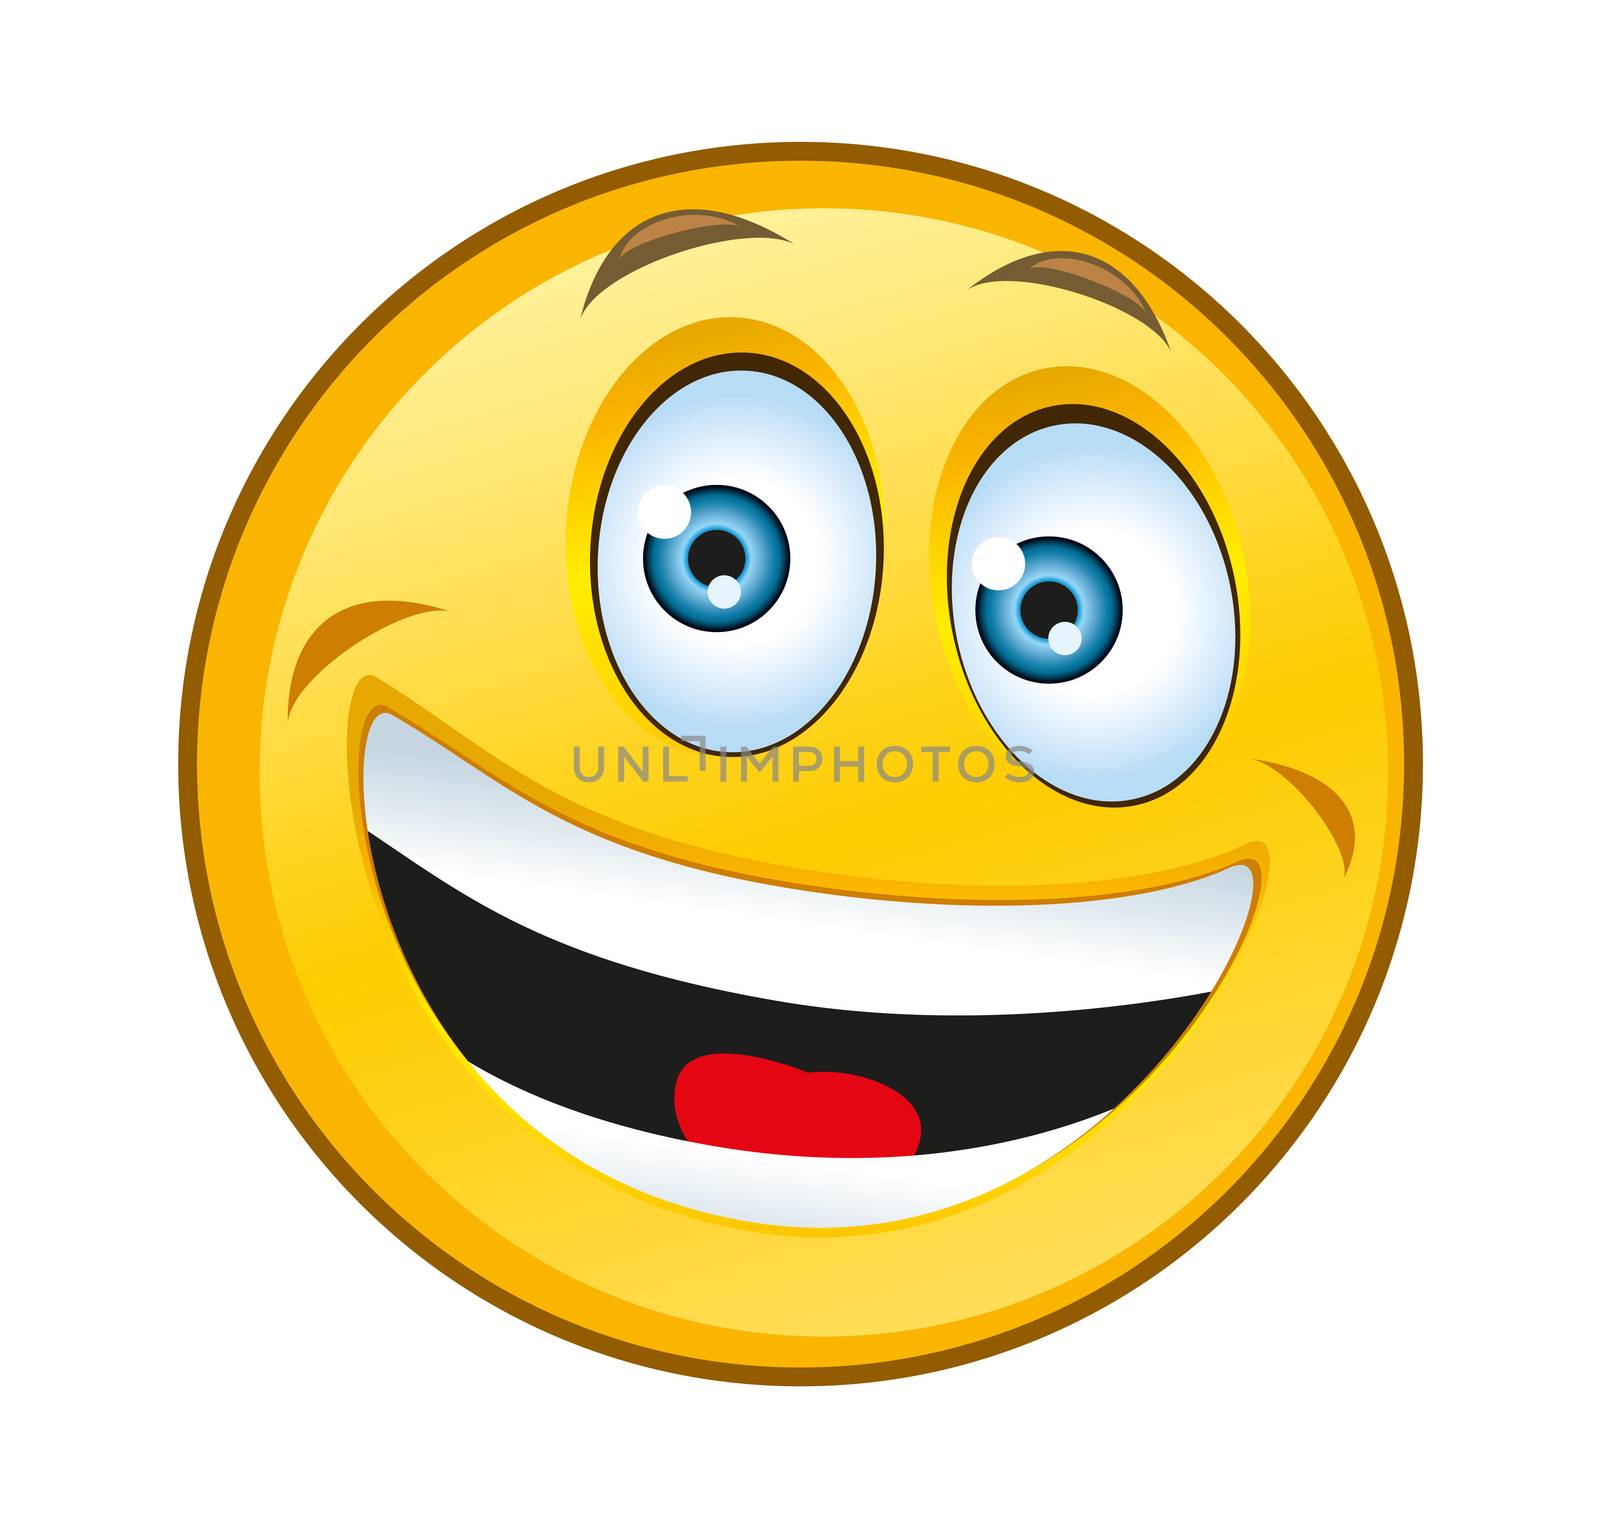 An illustration of a typical laughing yellow smilie